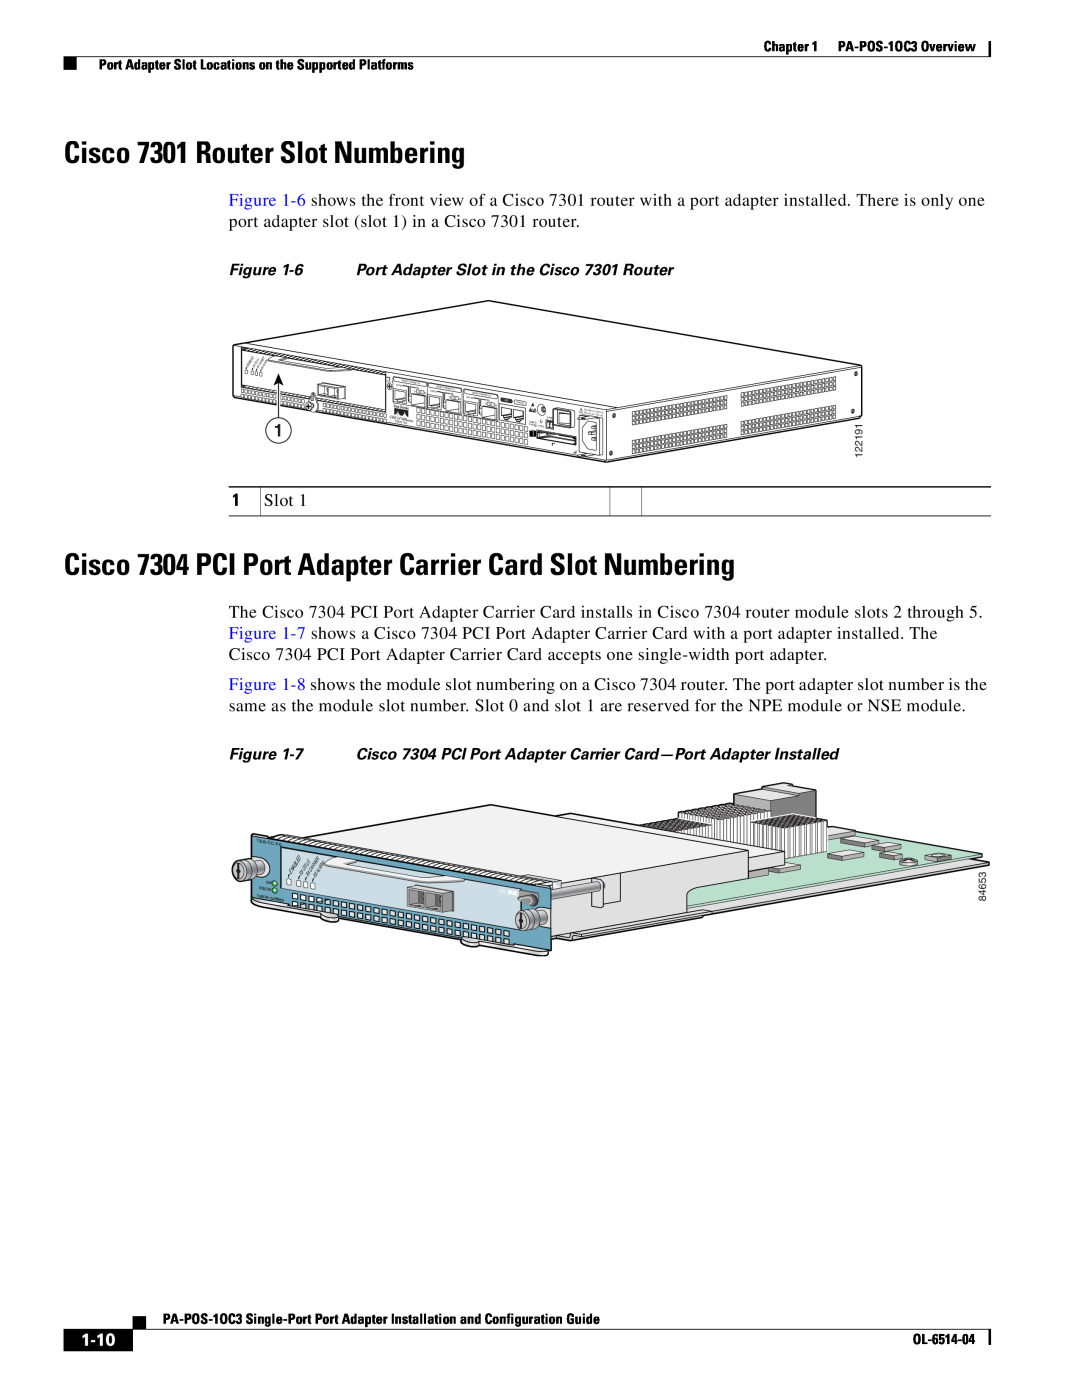 Cisco Systems PA-POS-2OC3 Cisco 7301 Router Slot Numbering, Cisco 7304 PCI Port Adapter Carrier Card Slot Numbering, 1-10 